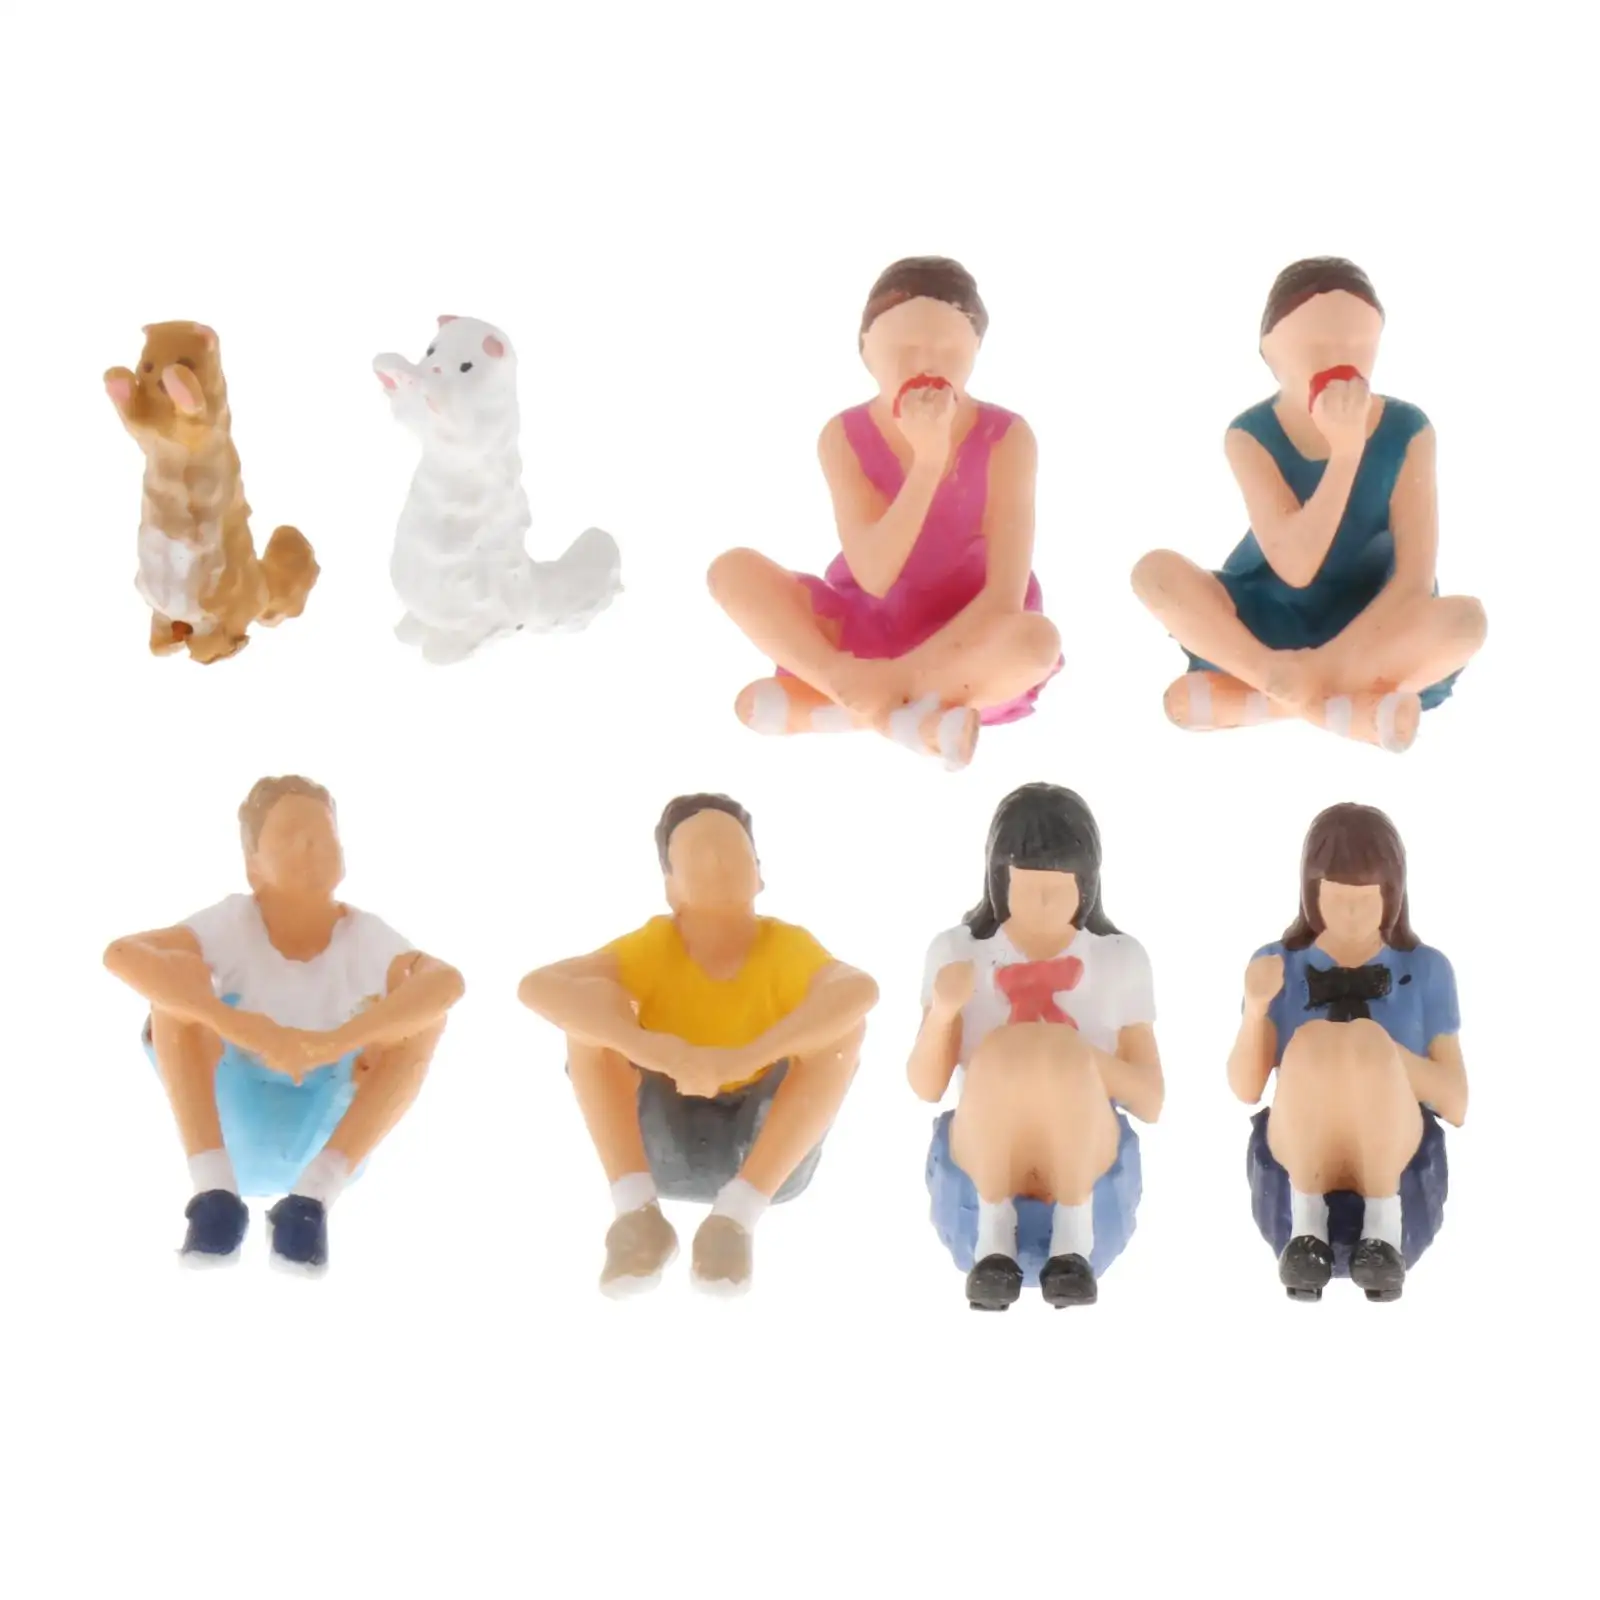 People Action Figures 1:64 Scale Model People Figures Small People Sitting And Crouching for Miniature Scenes